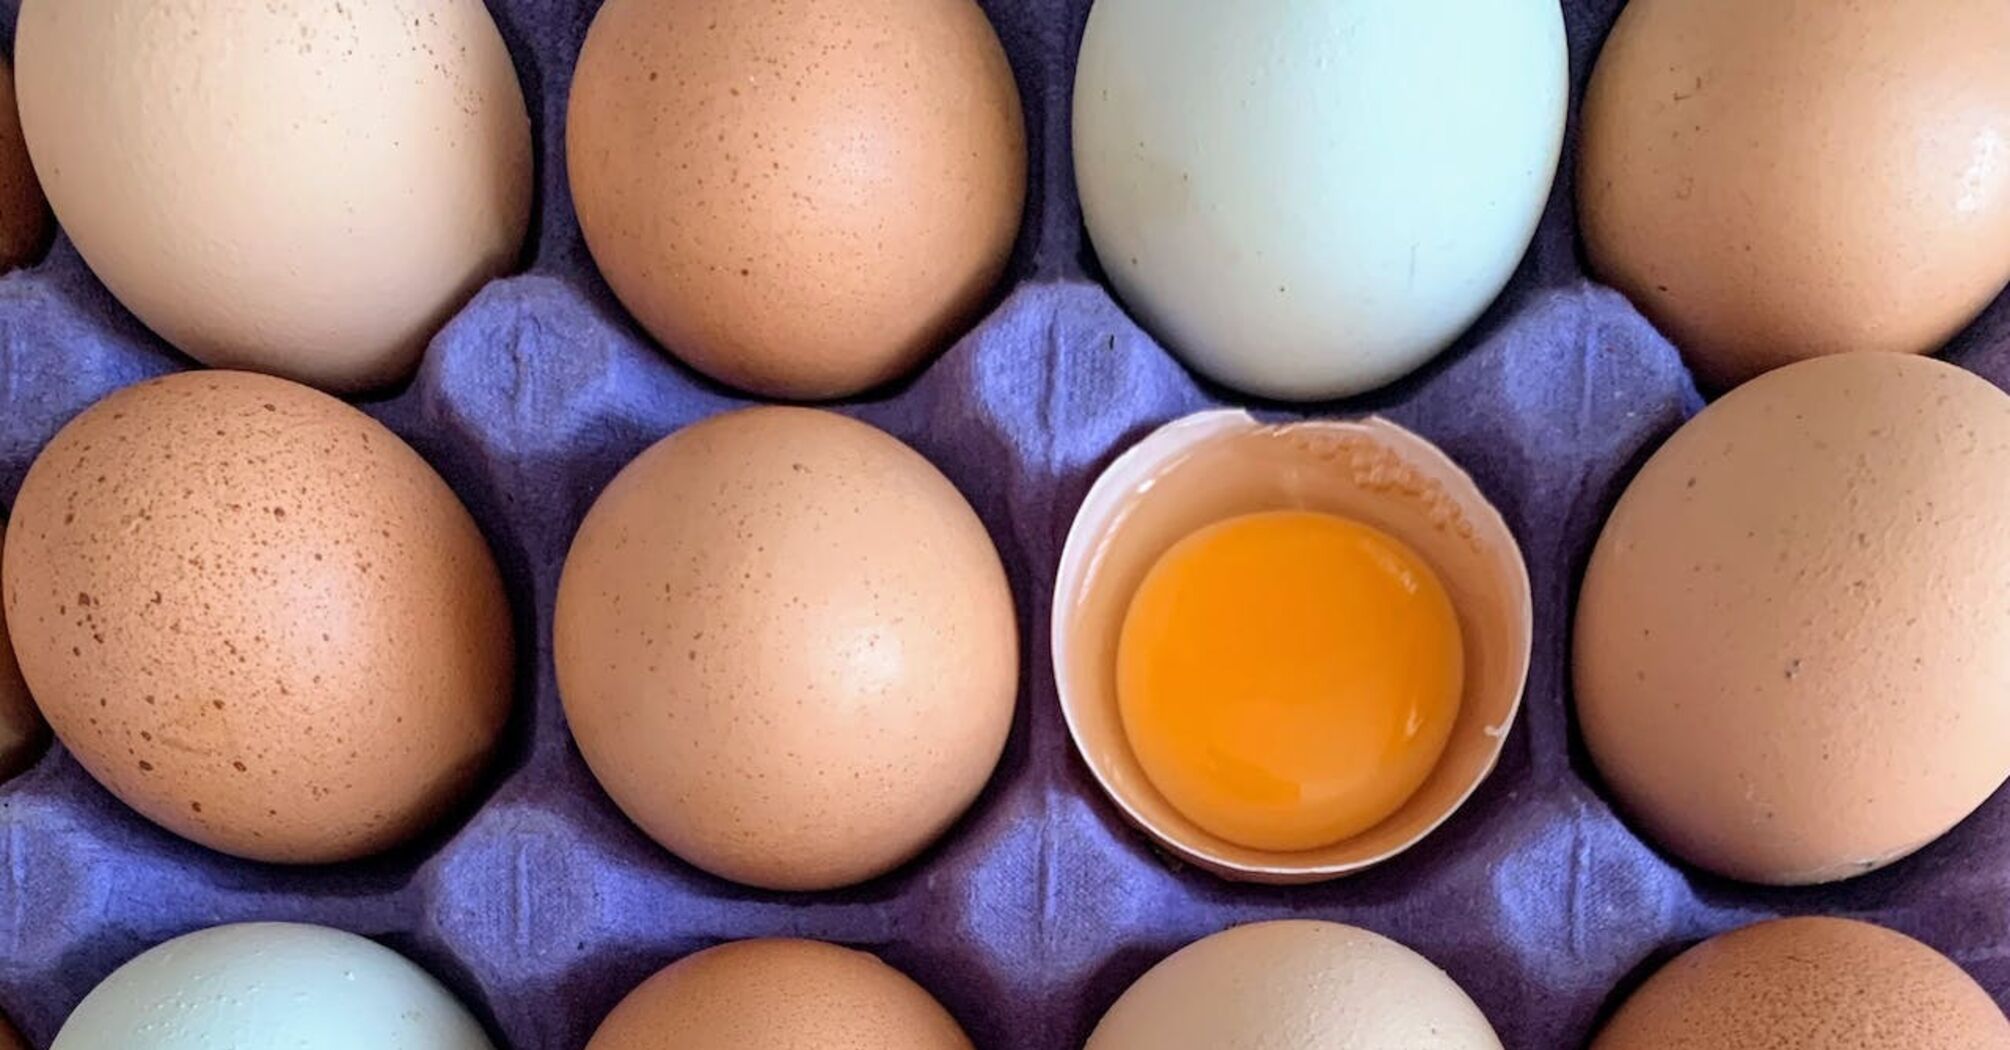 Simple ways to check the freshness of eggs at home